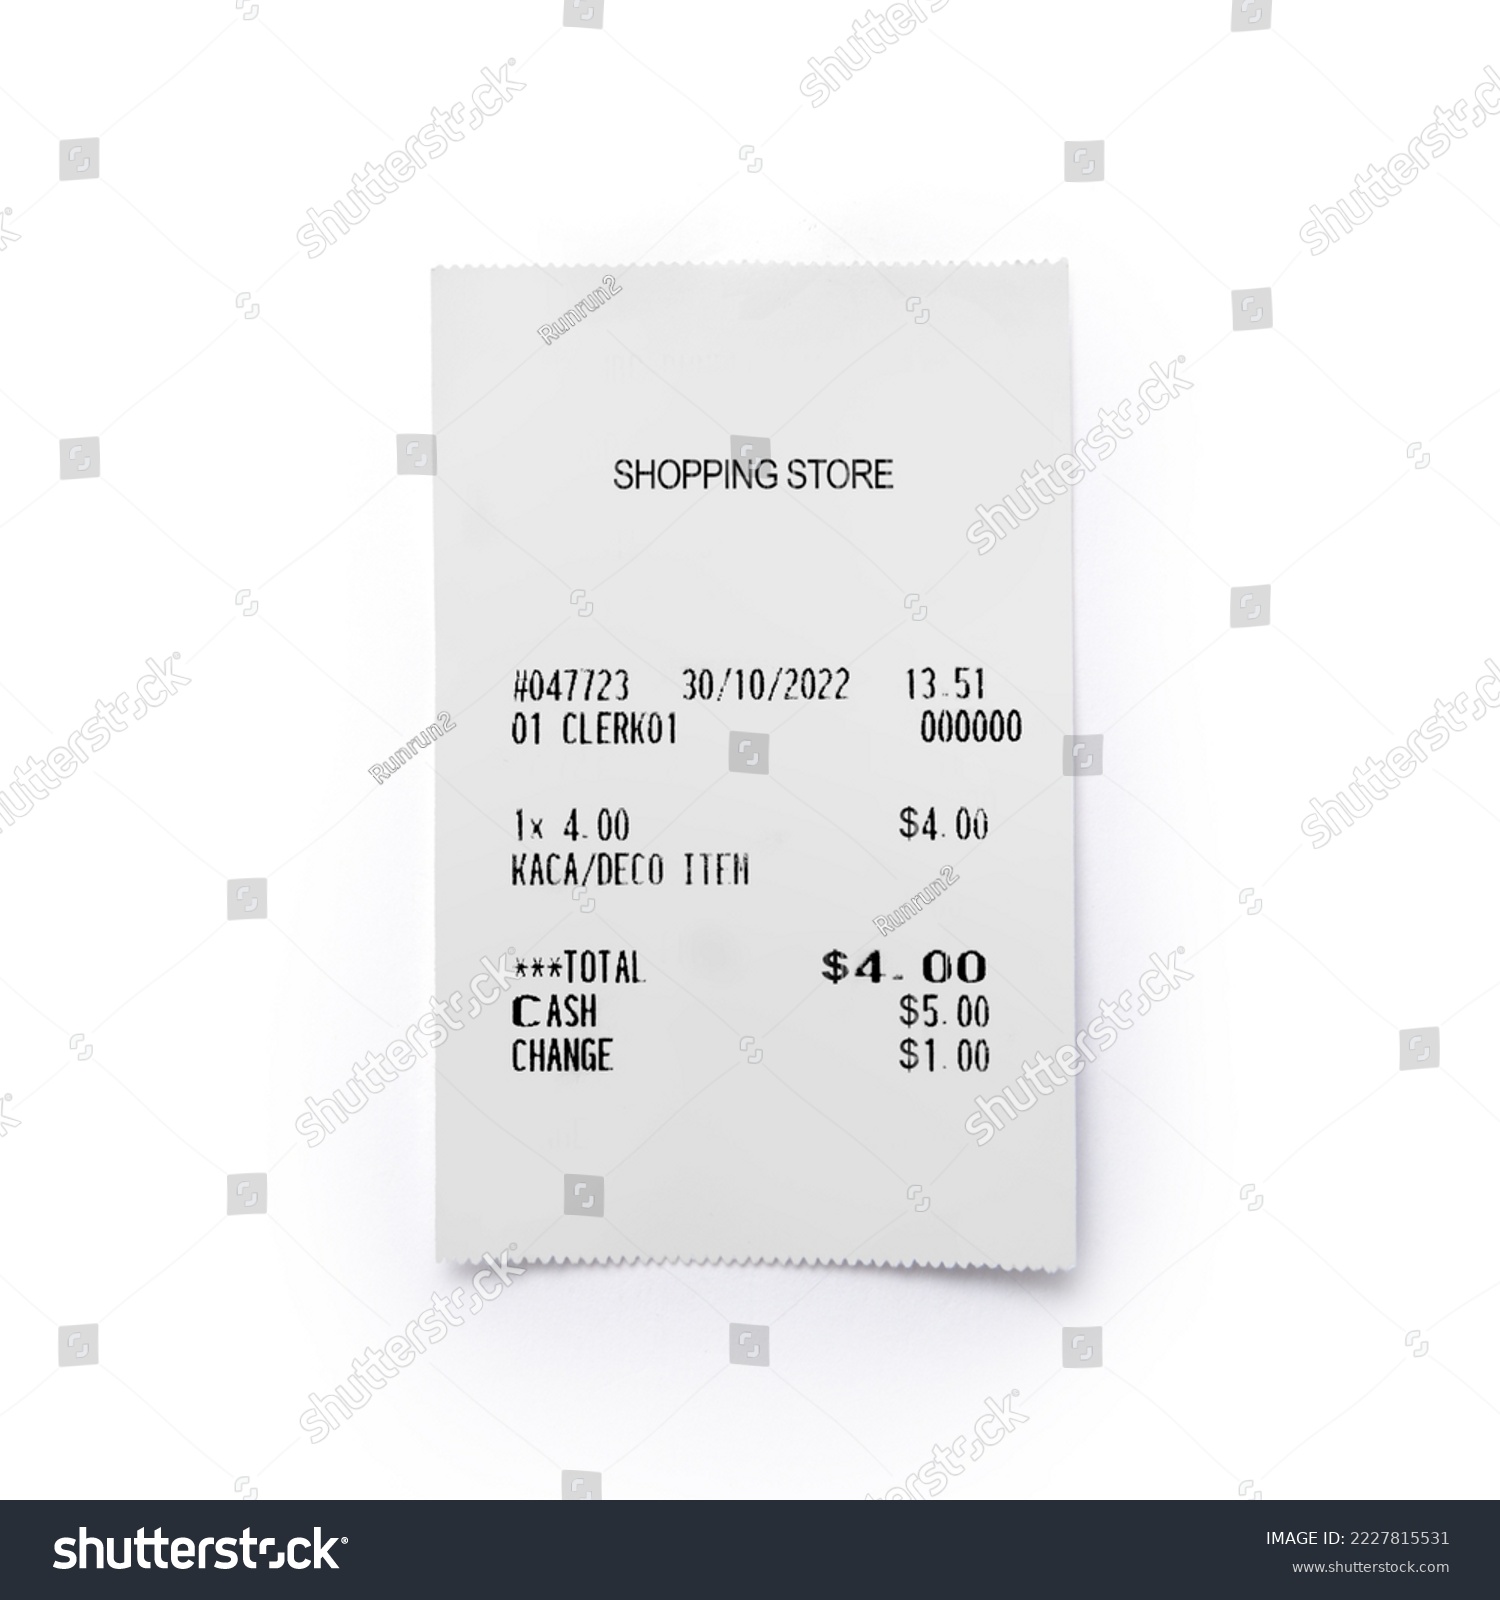 Paper printed sales shop receipt isolated on white background #2227815531